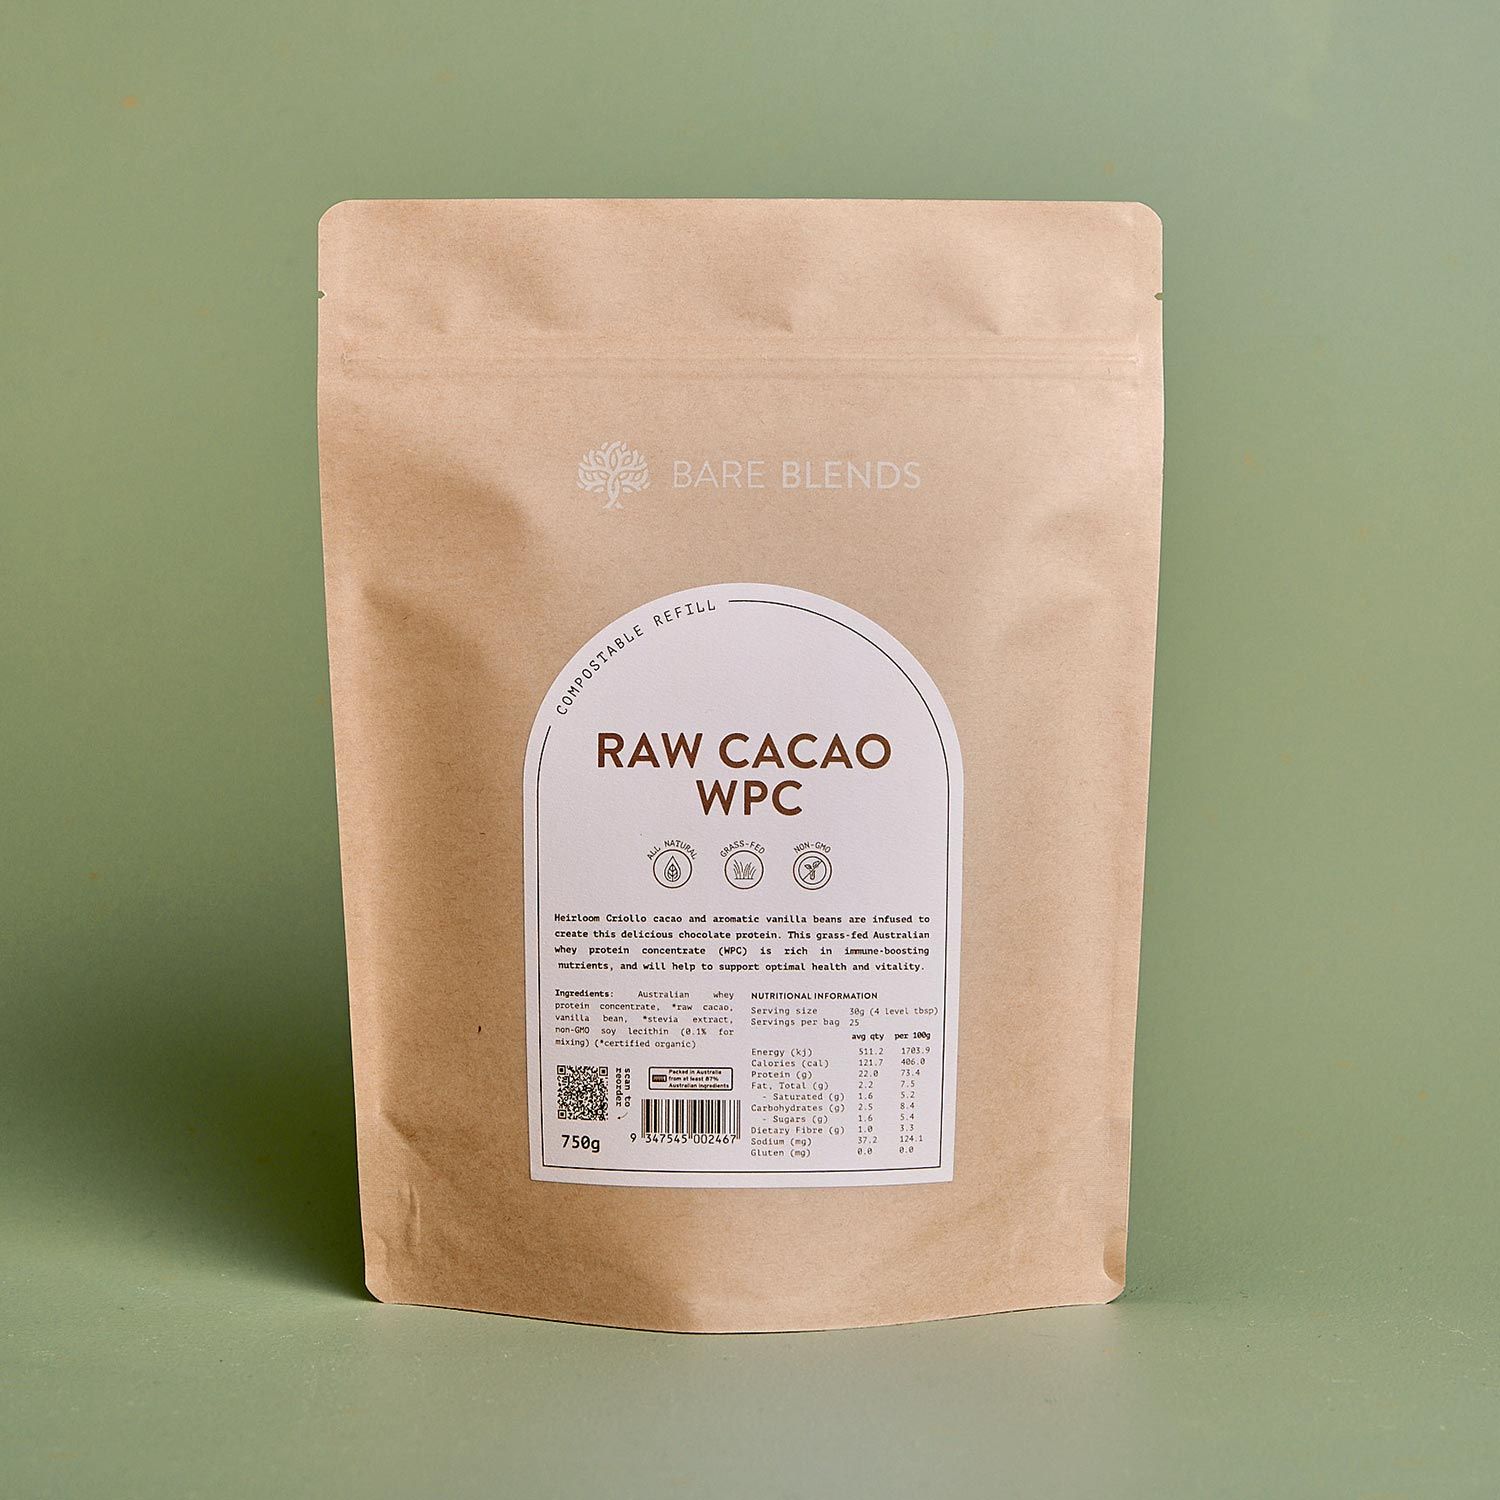 Raw Cacao WPC pouch